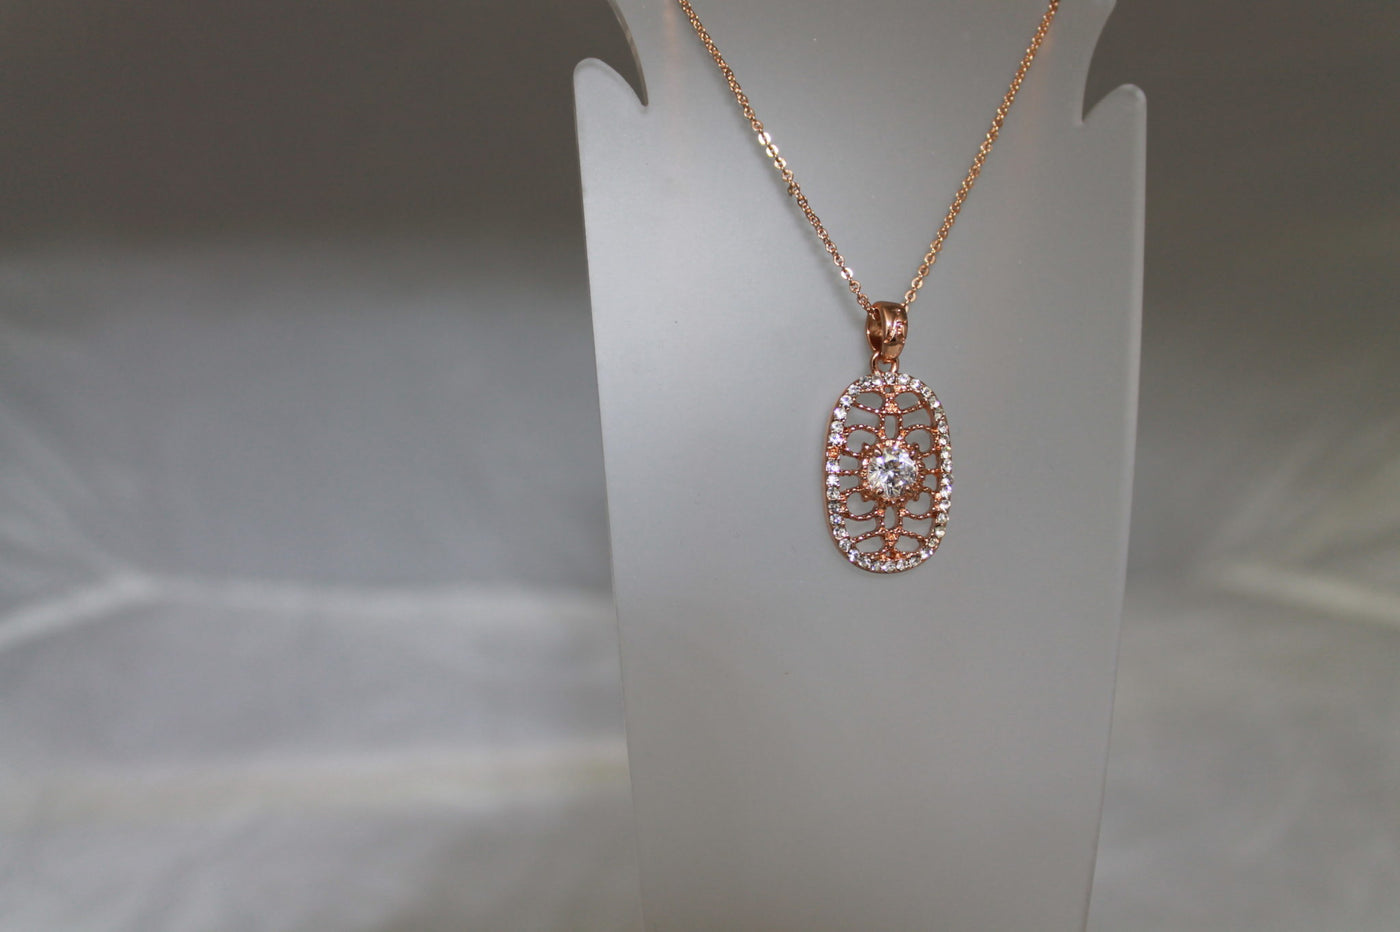 Rose Gold Tone Necklace with a filigree pendant